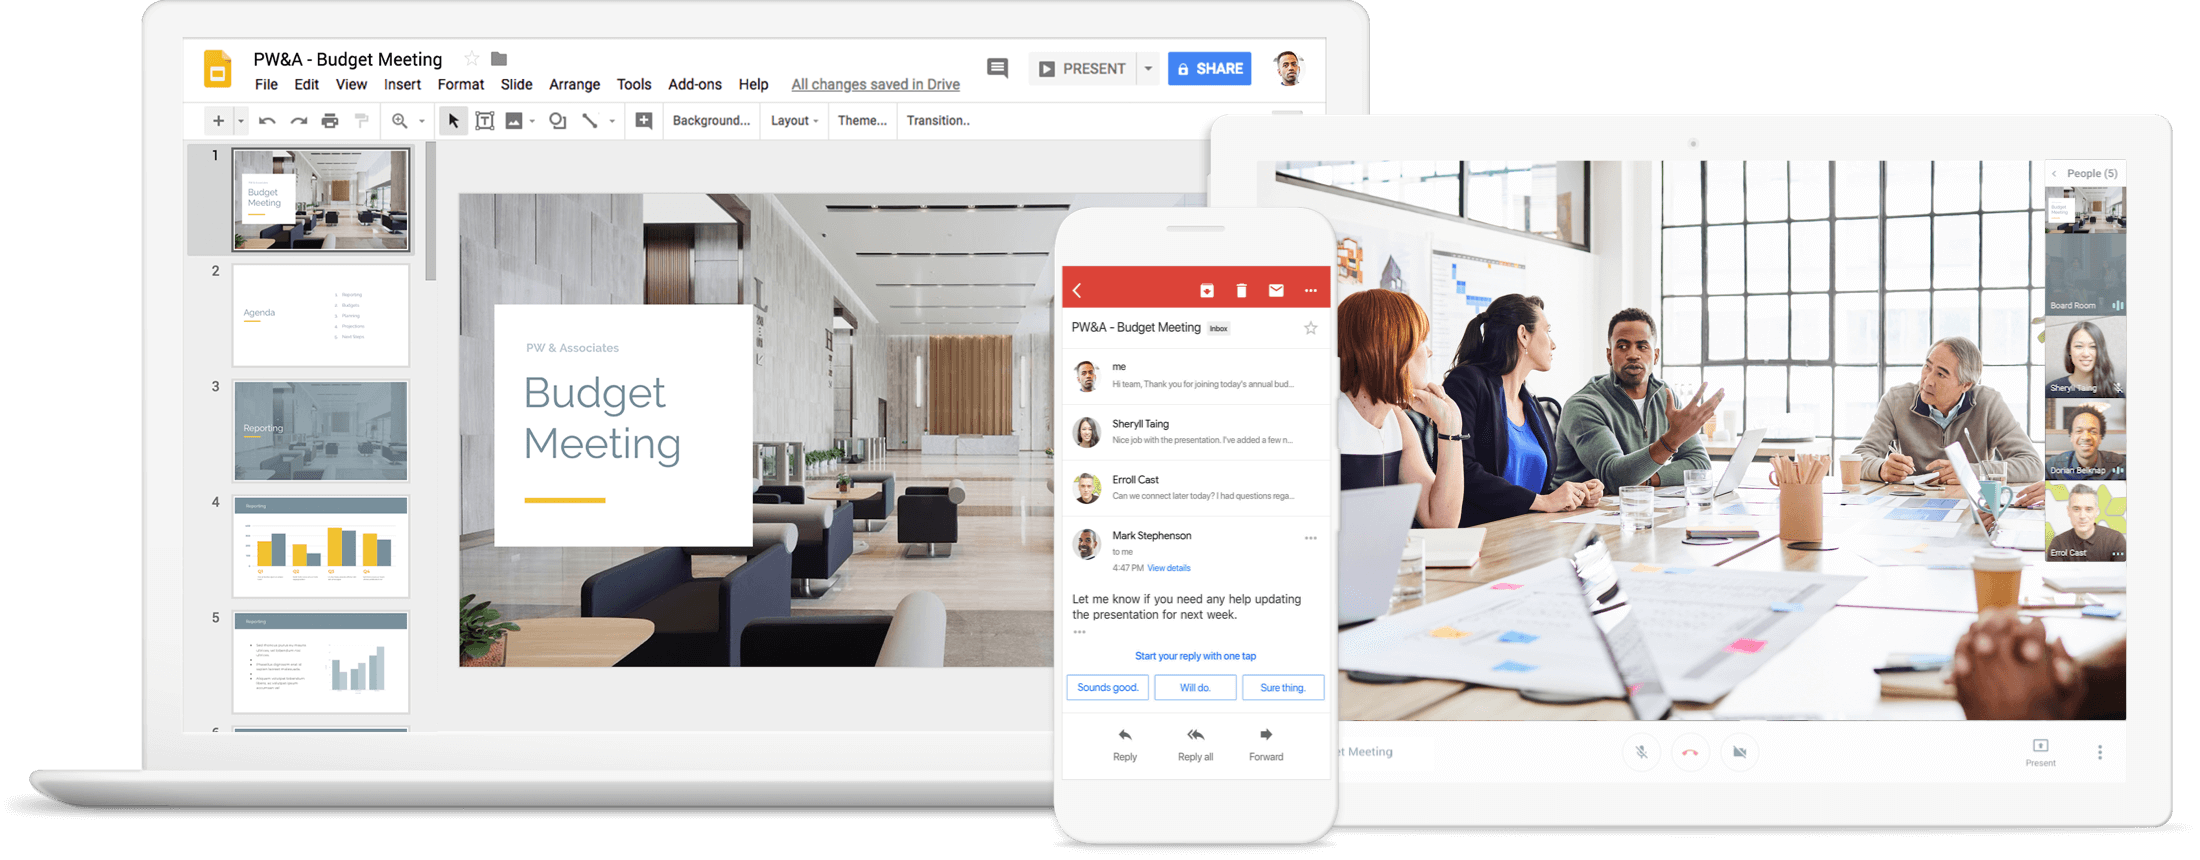 G Suite: Collaboration & Productivity Apps for Business